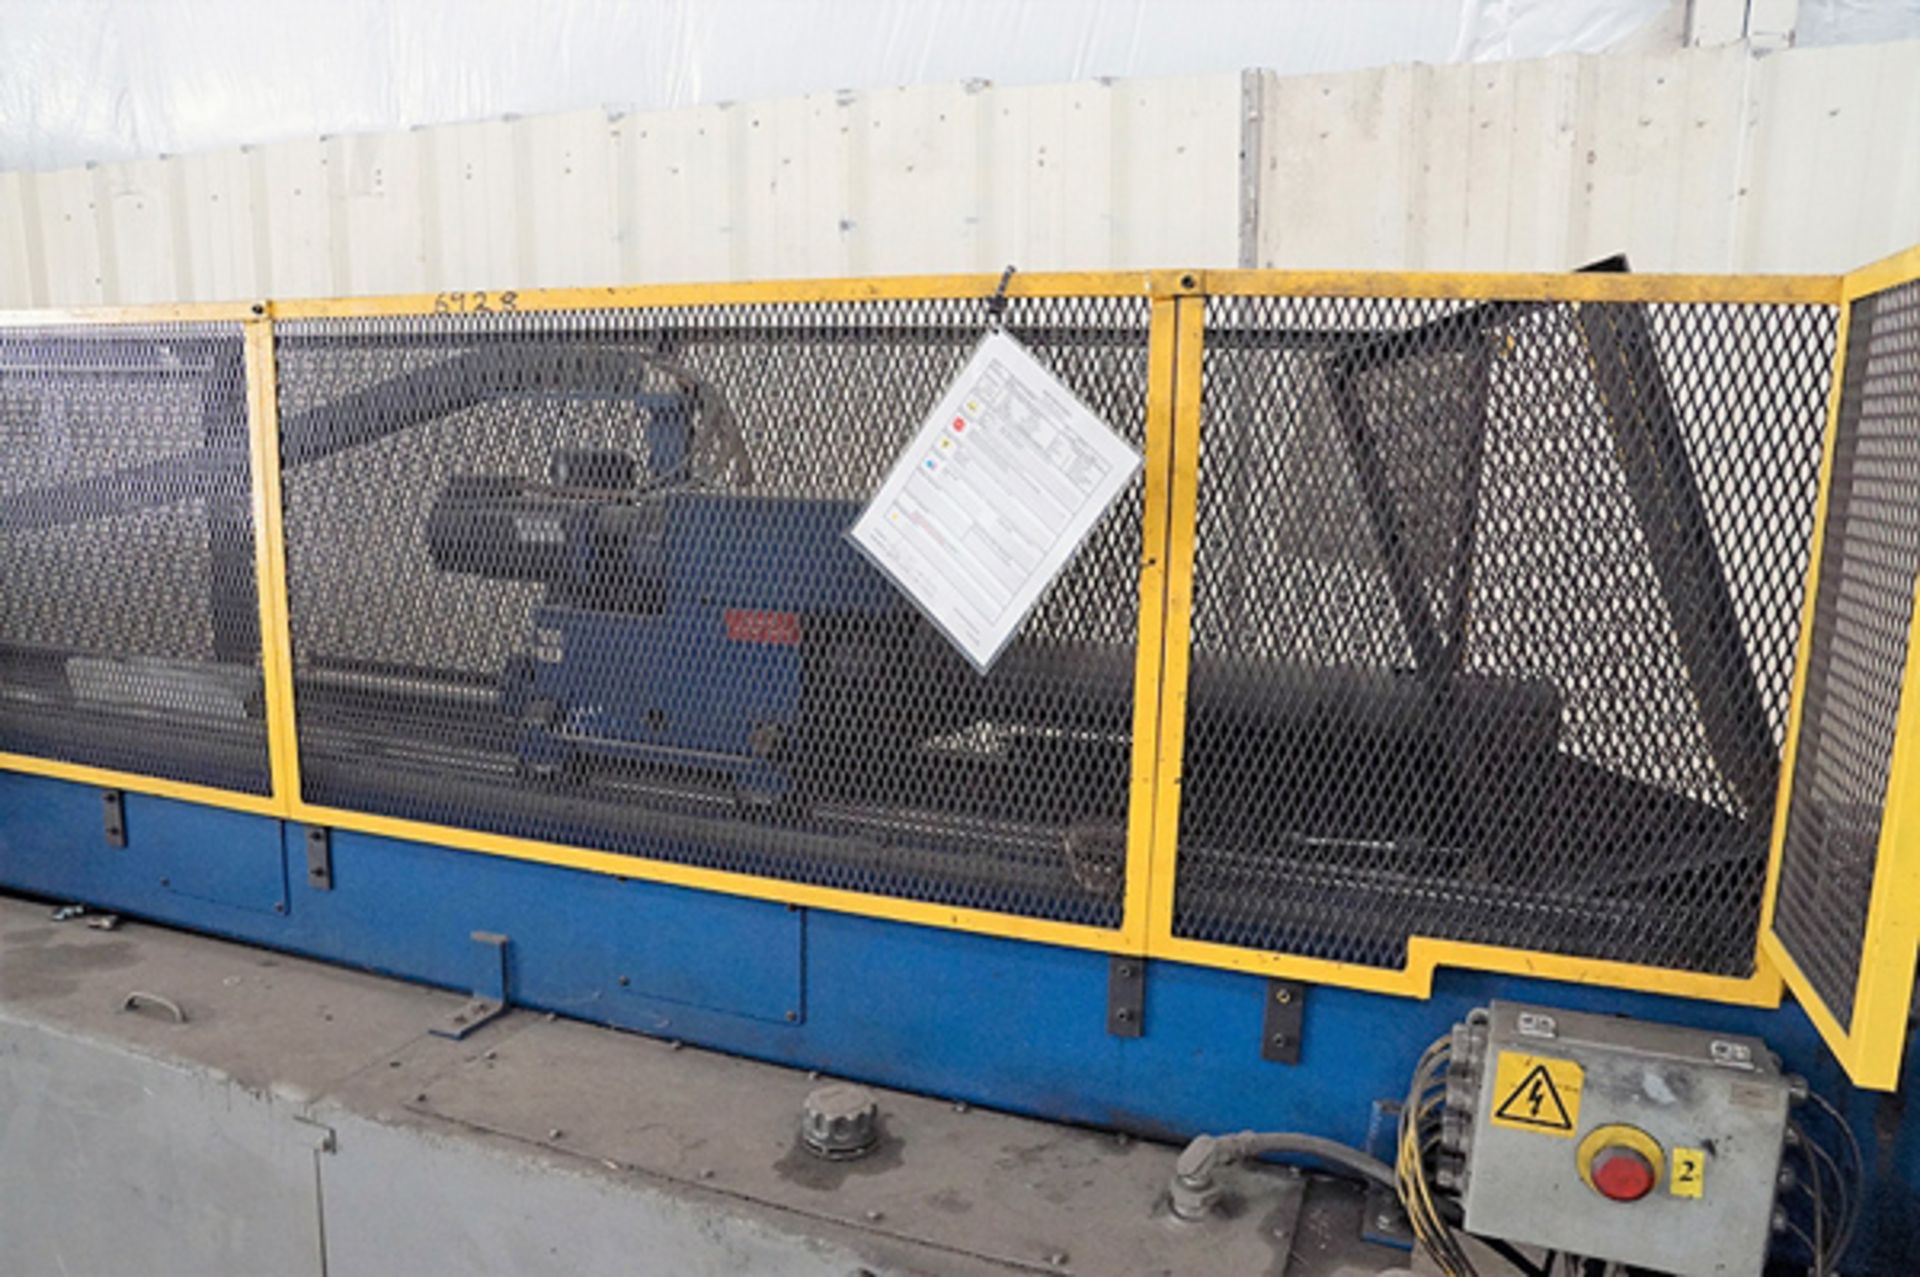 Eaton Leonard CNC Hydraulic Tube & Pipe Bender 2'' x 174''. LOADING FEE FOR THIS LOT: $750 - Image 6 of 11